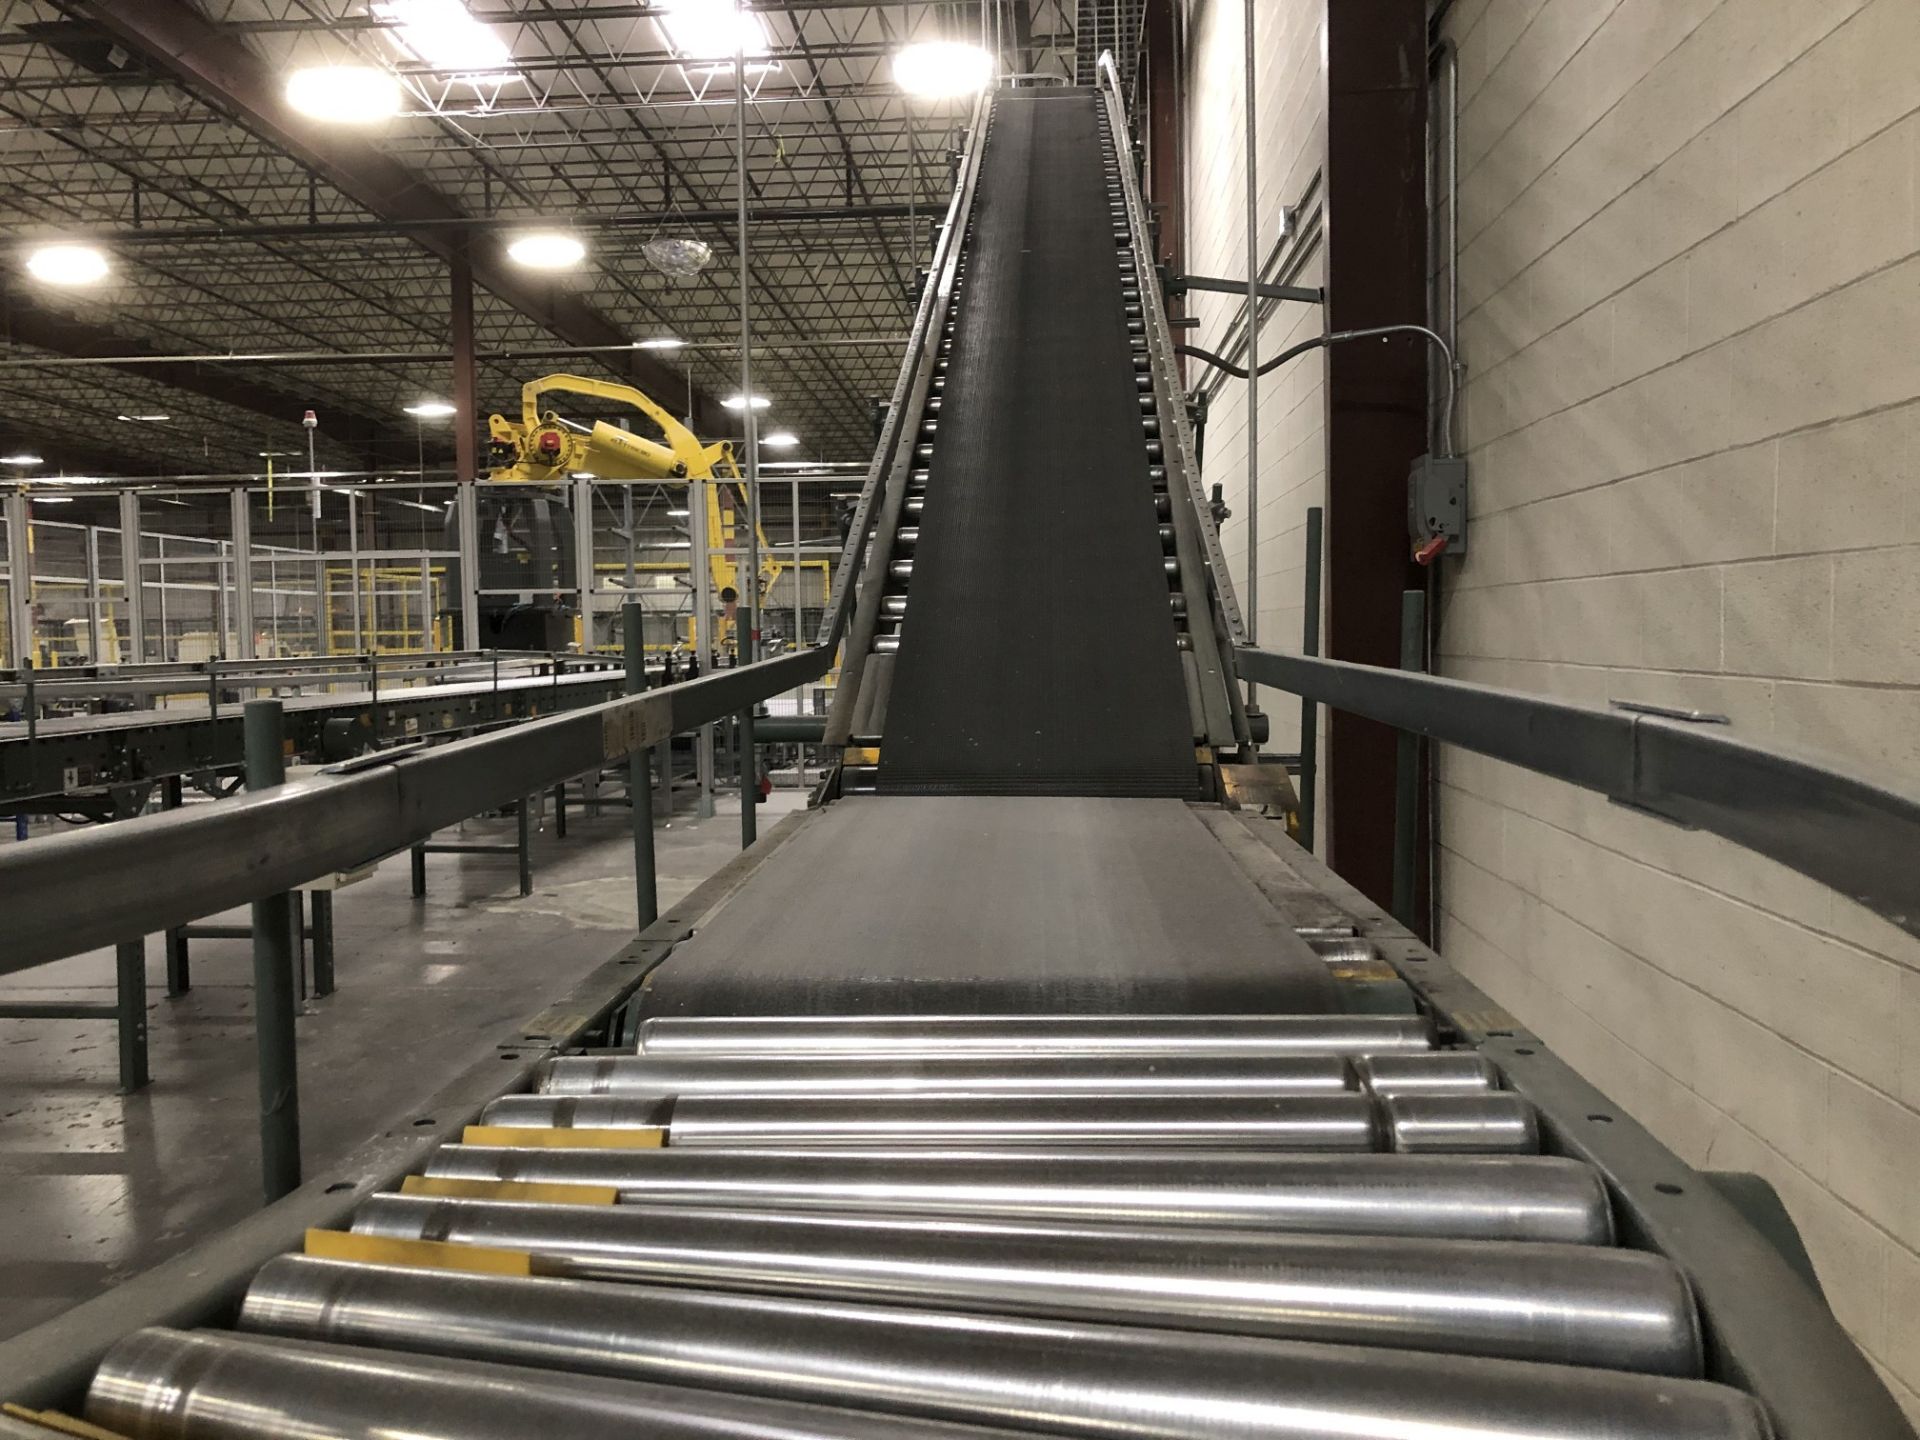 All Hytrol Conveyor Throughout Entire Site, Mostly 20" Wide Powered Roller Conveyor [Please - Image 27 of 80